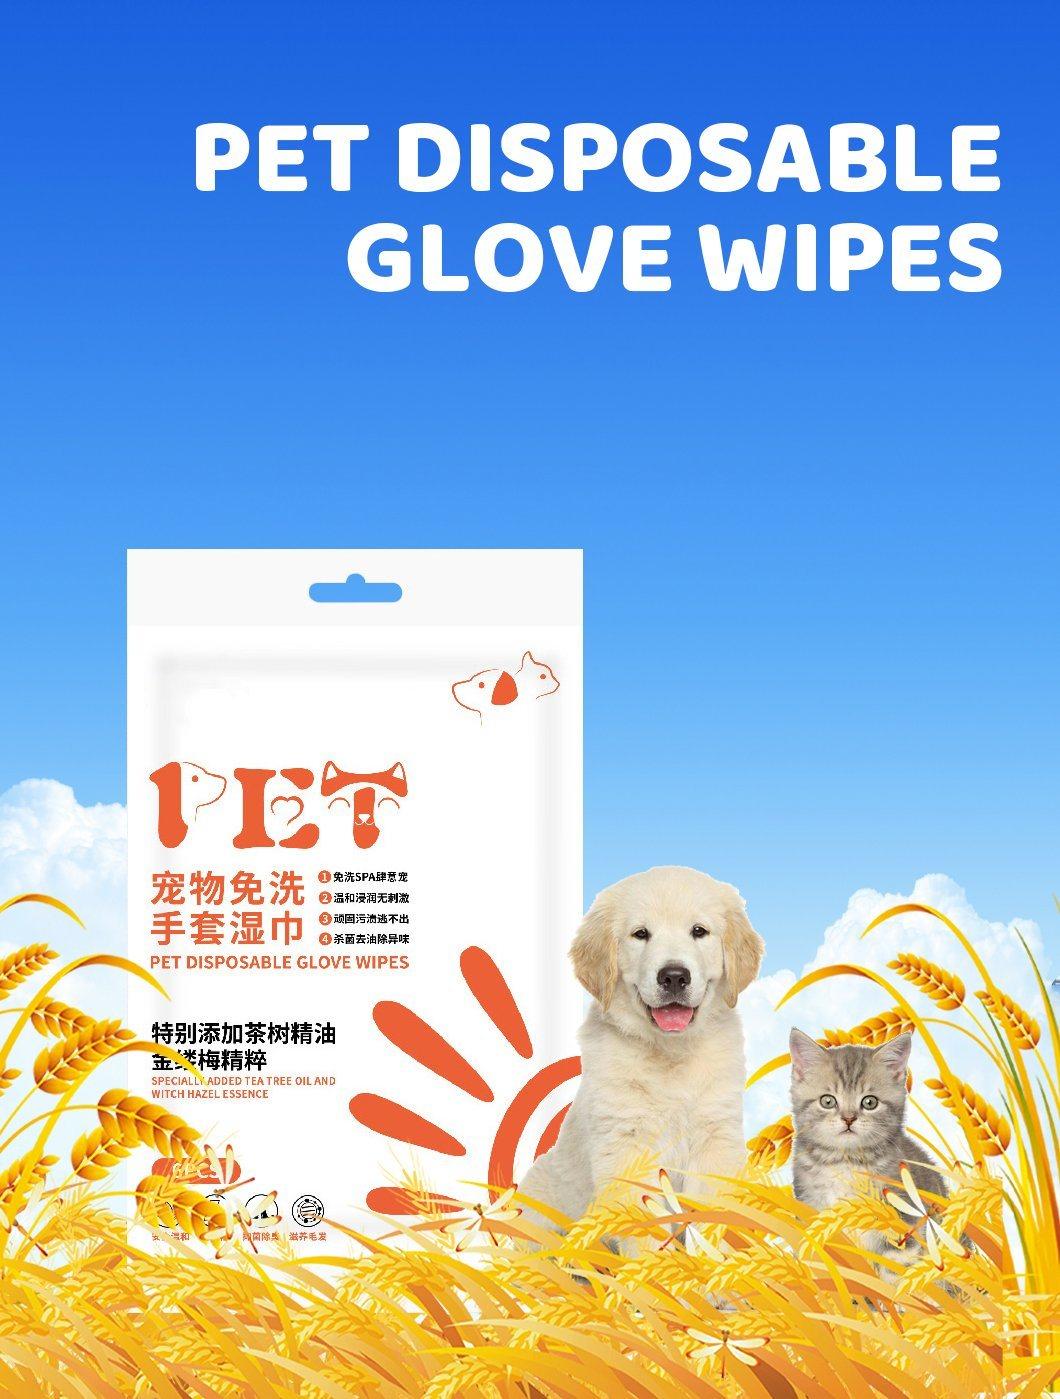 Pet Cleaning Glove, 6 Pieces Per Bag, Customize Logo/Size/Packaging, Good for New Enterprise, Really Excellent Price